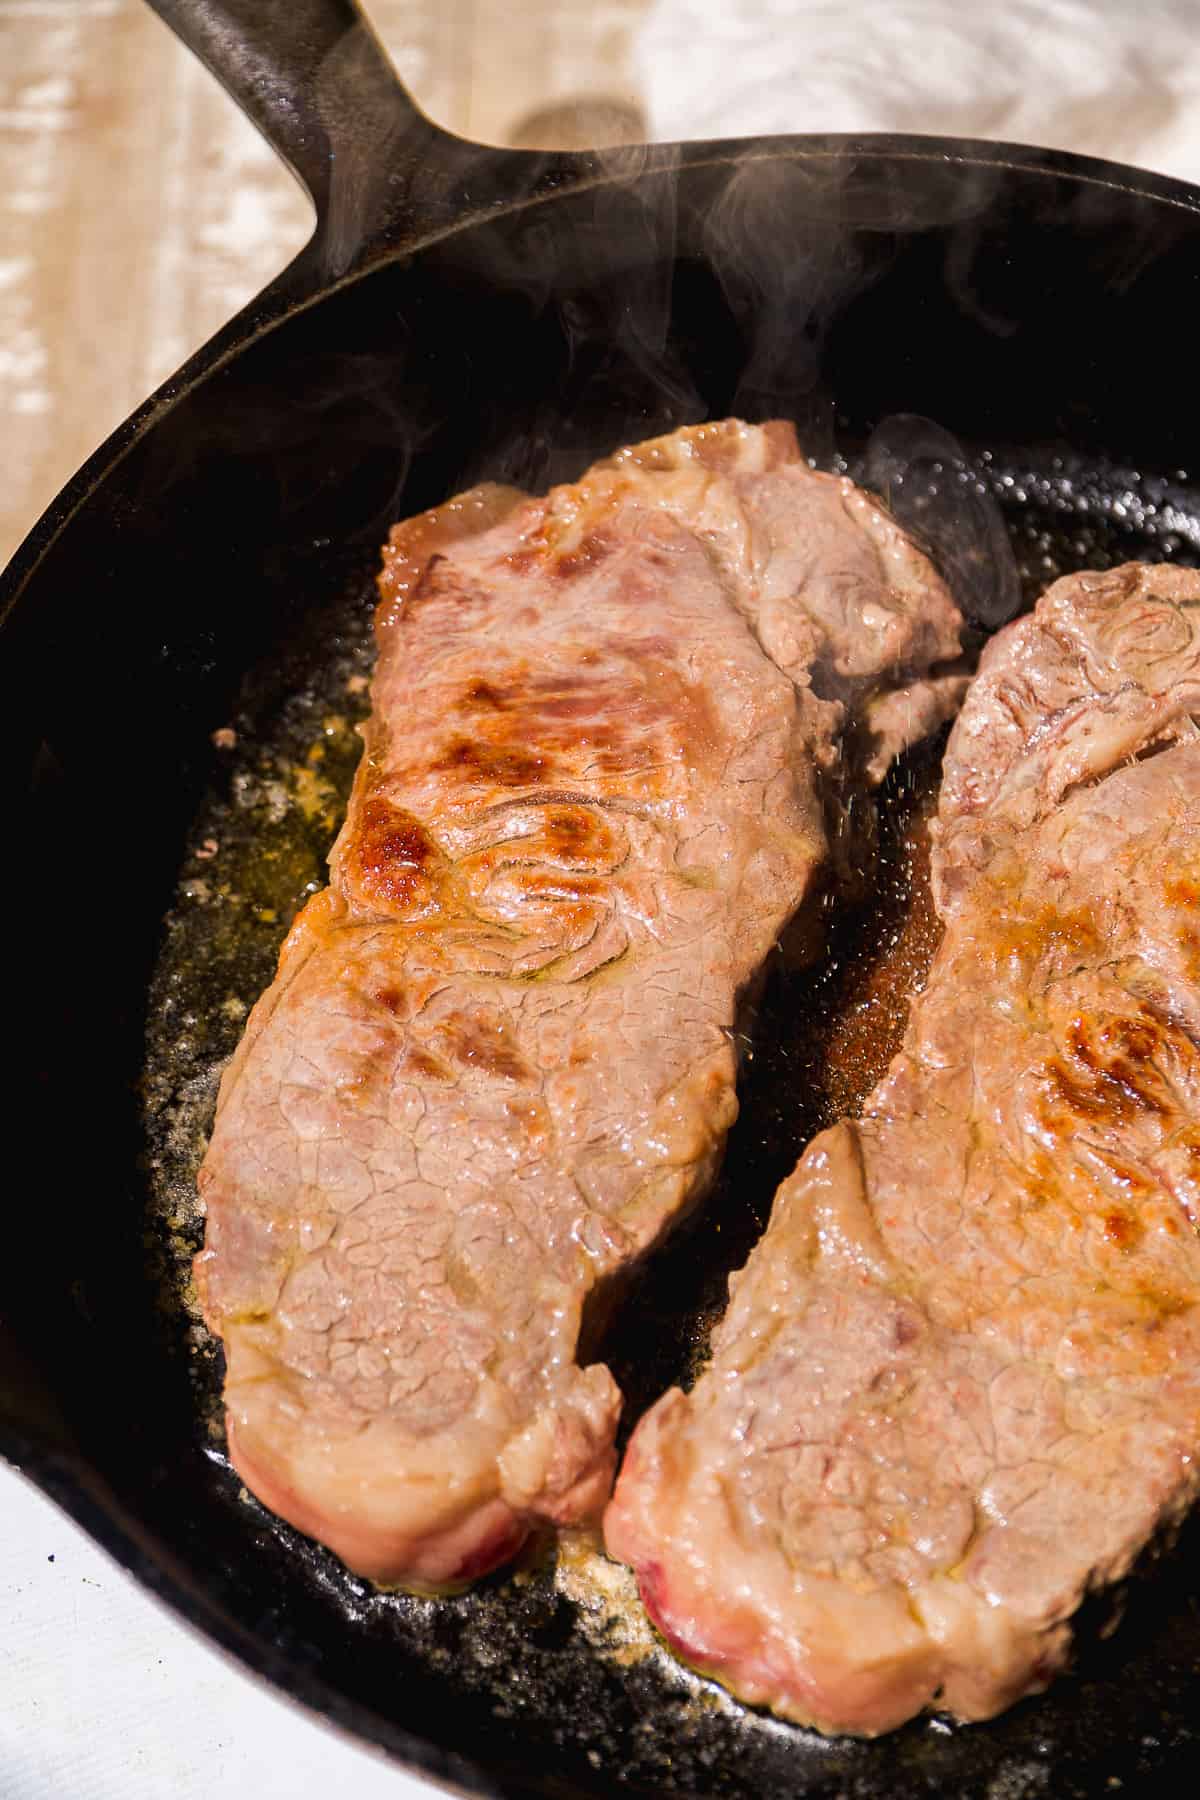 Steak cooking in a cast iron skillet.